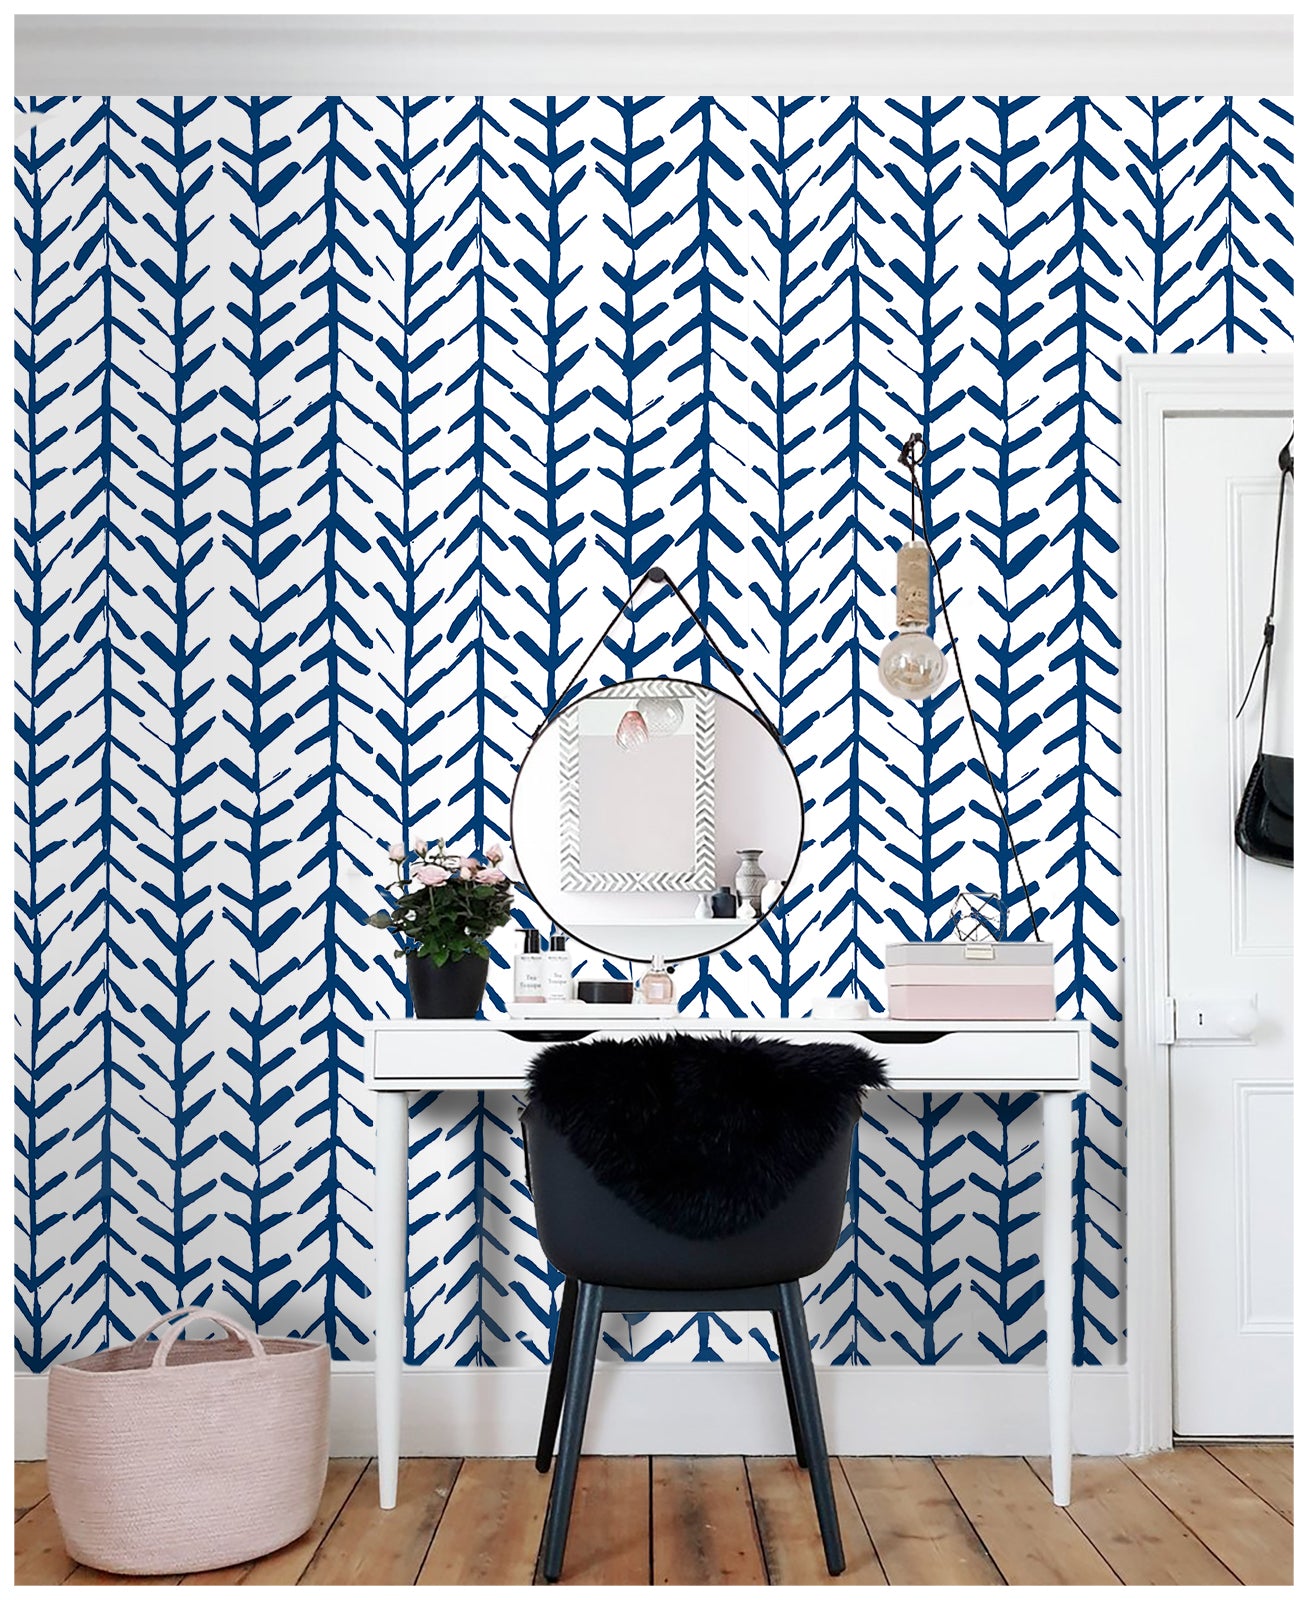 Geometric Contact Paper, Peel And Stick Wallpaper